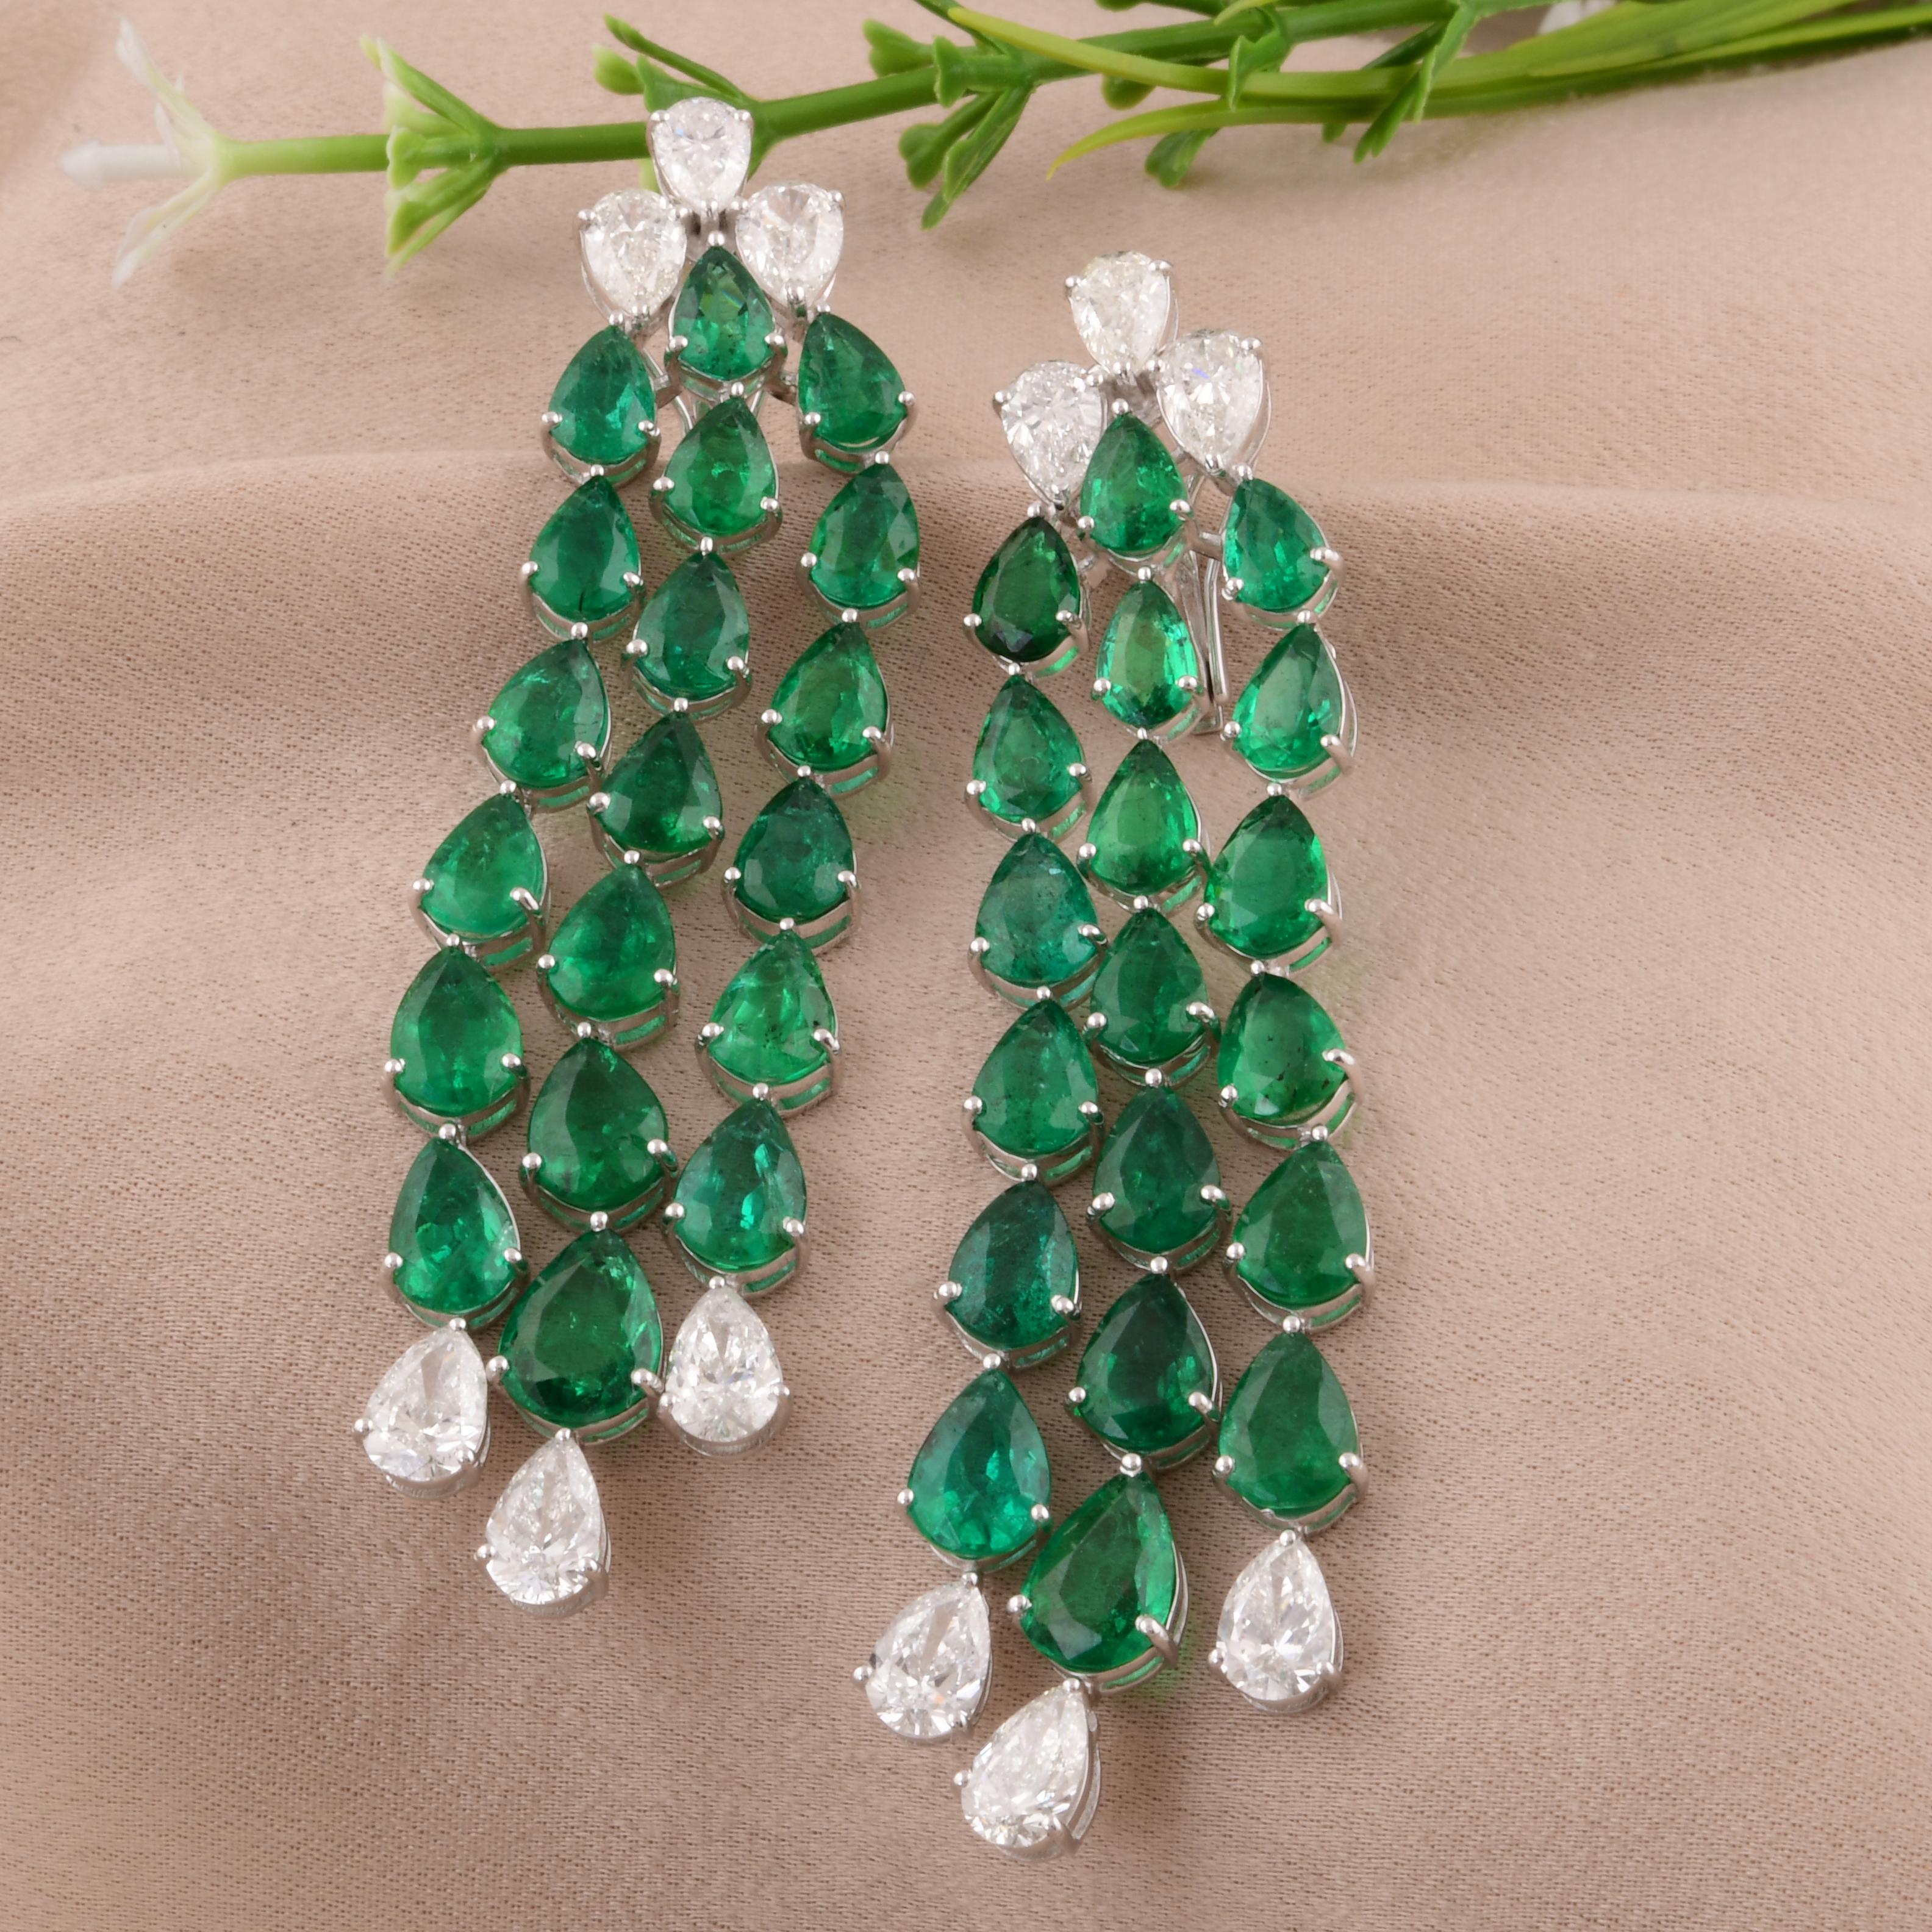 Item Code :- SEE-15234
Gross Wt. :- 18.21 gm
18k White Gold Wt. :- 13.48 gm
Natural Diamond Wt. :- 4.65 Ct. (AVERAGE DIAMOND CLARITY SI1-SI2 AND COLOR H-I)
Emerald Wt. :- 19.03 Ct.
Earrings Size :- 61 mm approx.

✦ Sizing
.....................
We